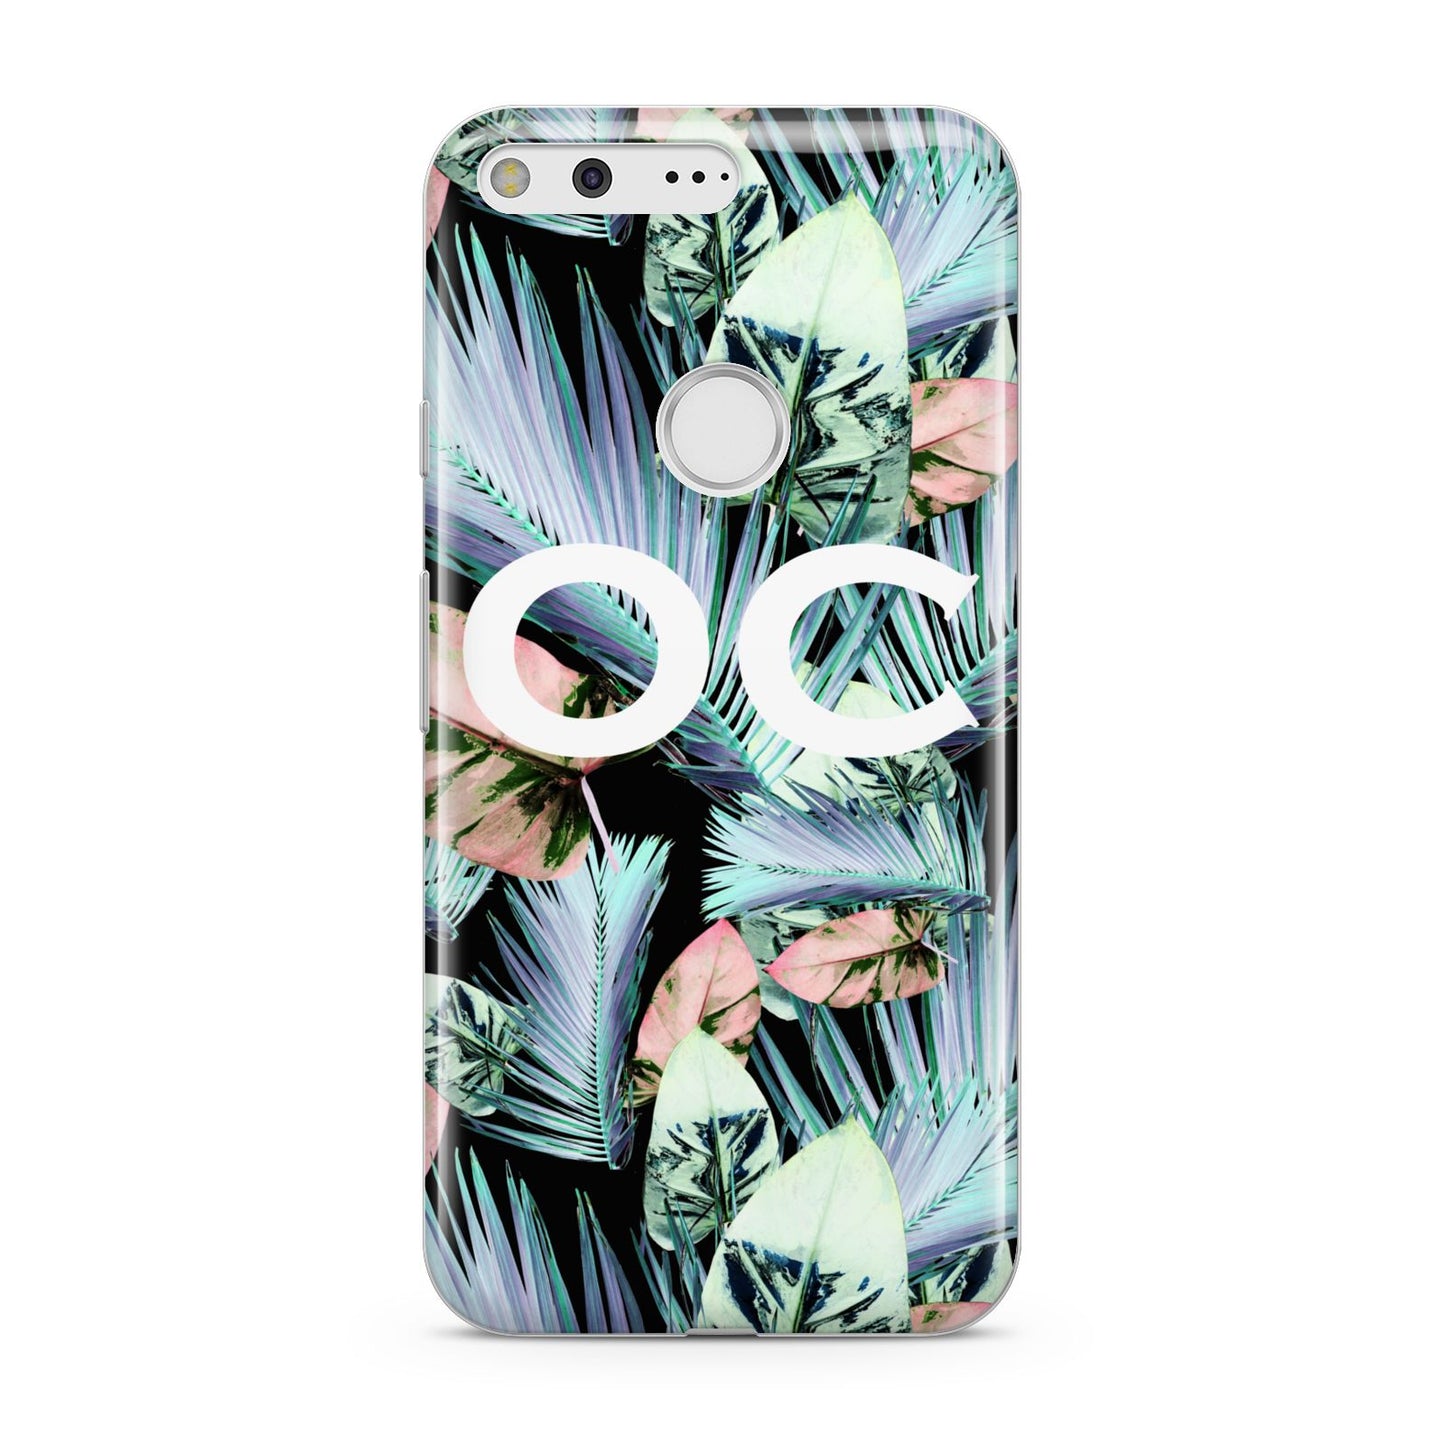 Personalised Abstract Tropical Leaves Google Pixel Case